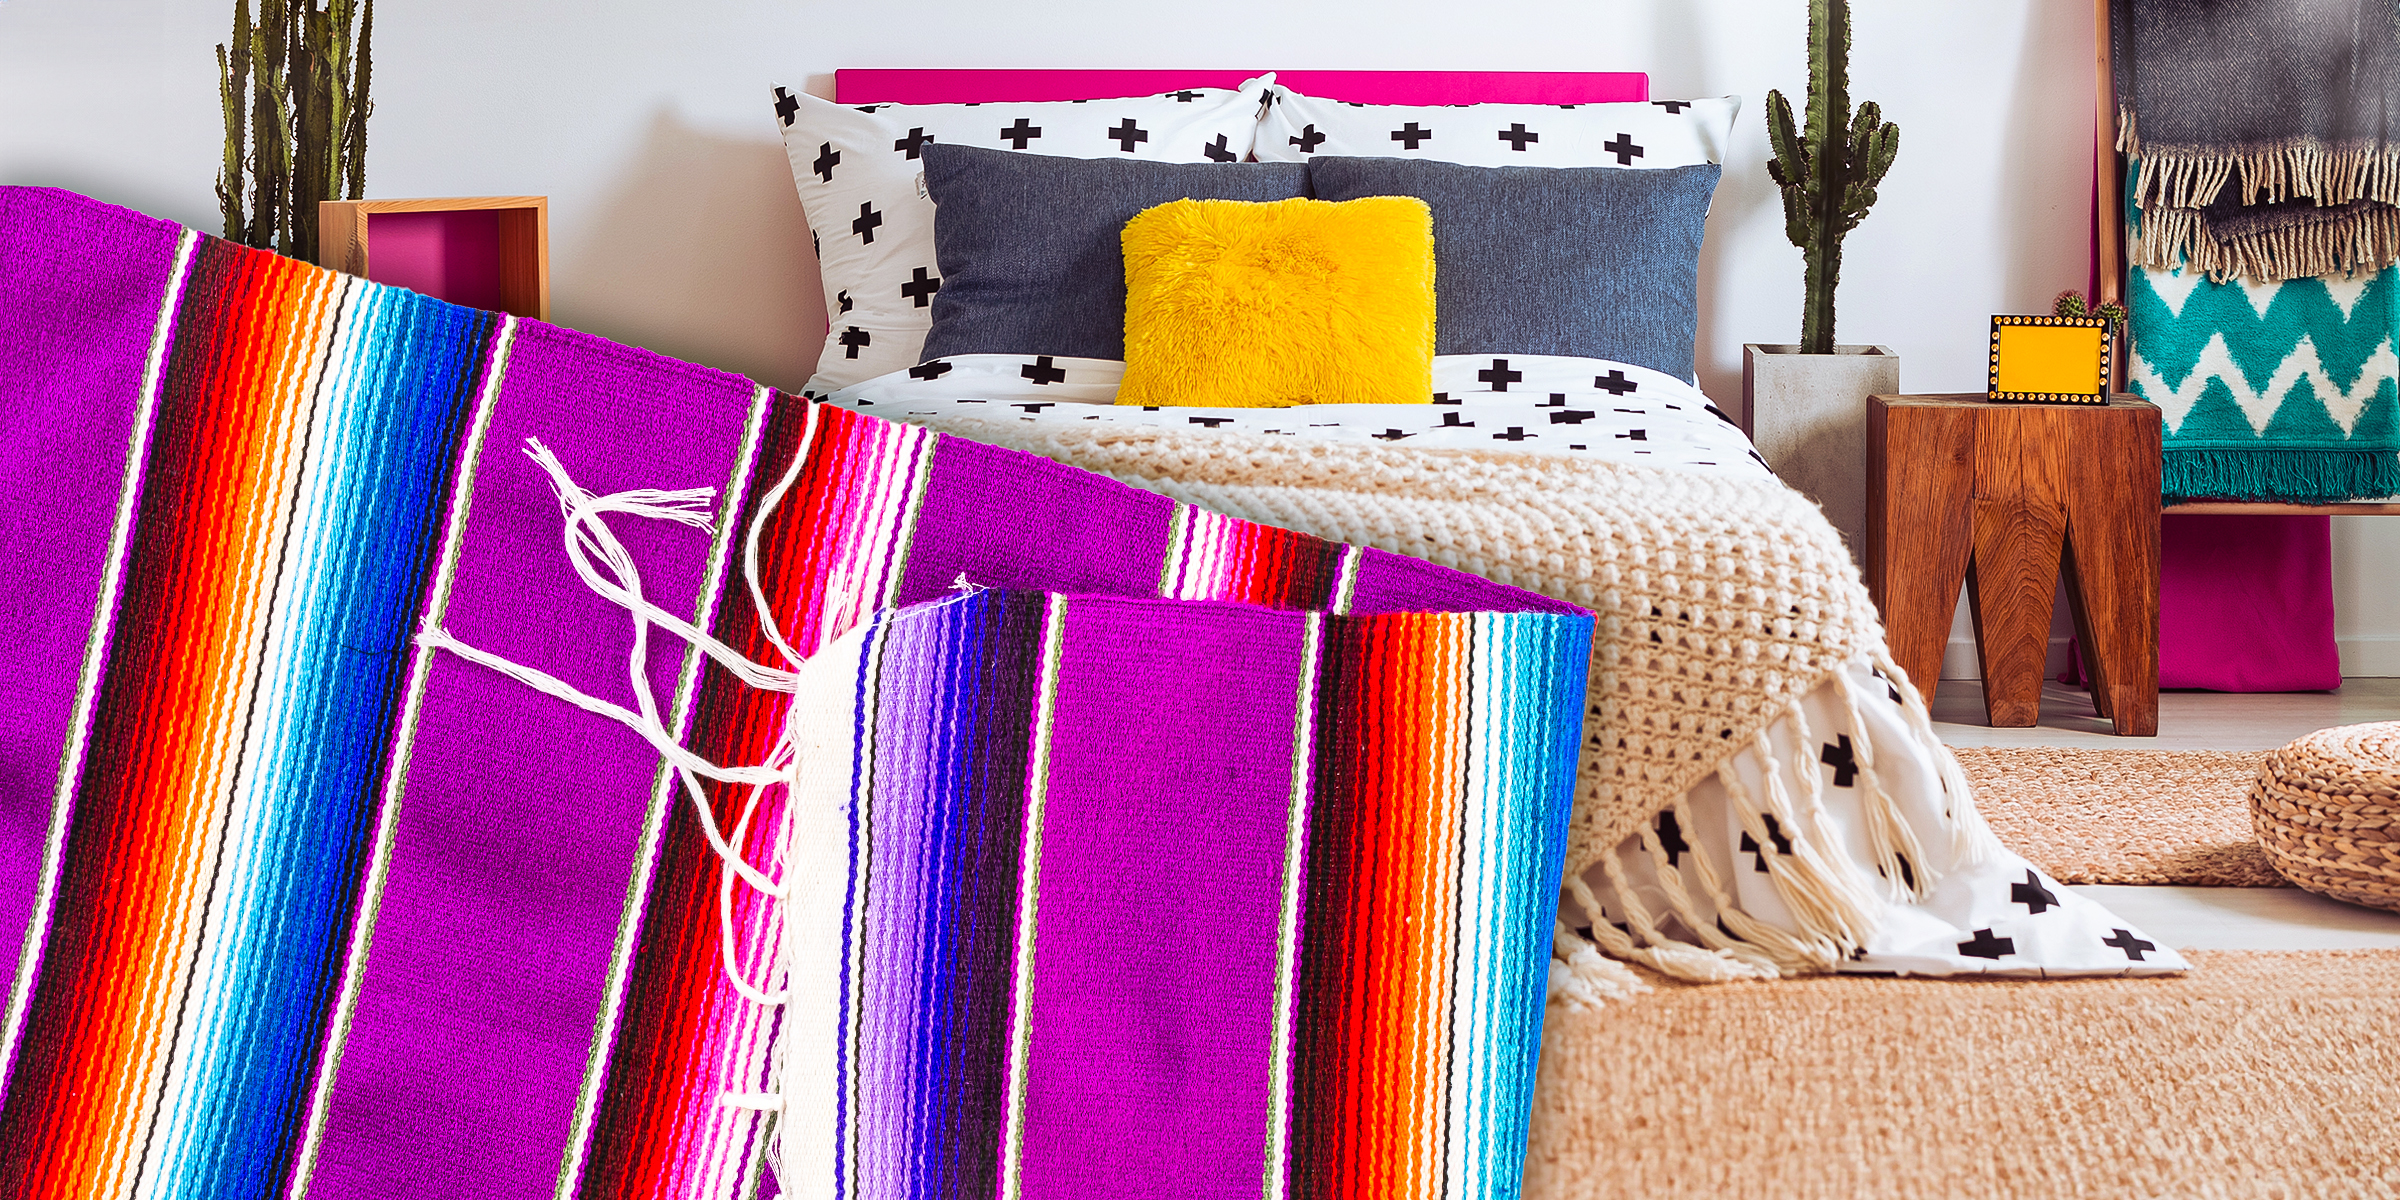 A Mexican blanket | Source: Shutterstock